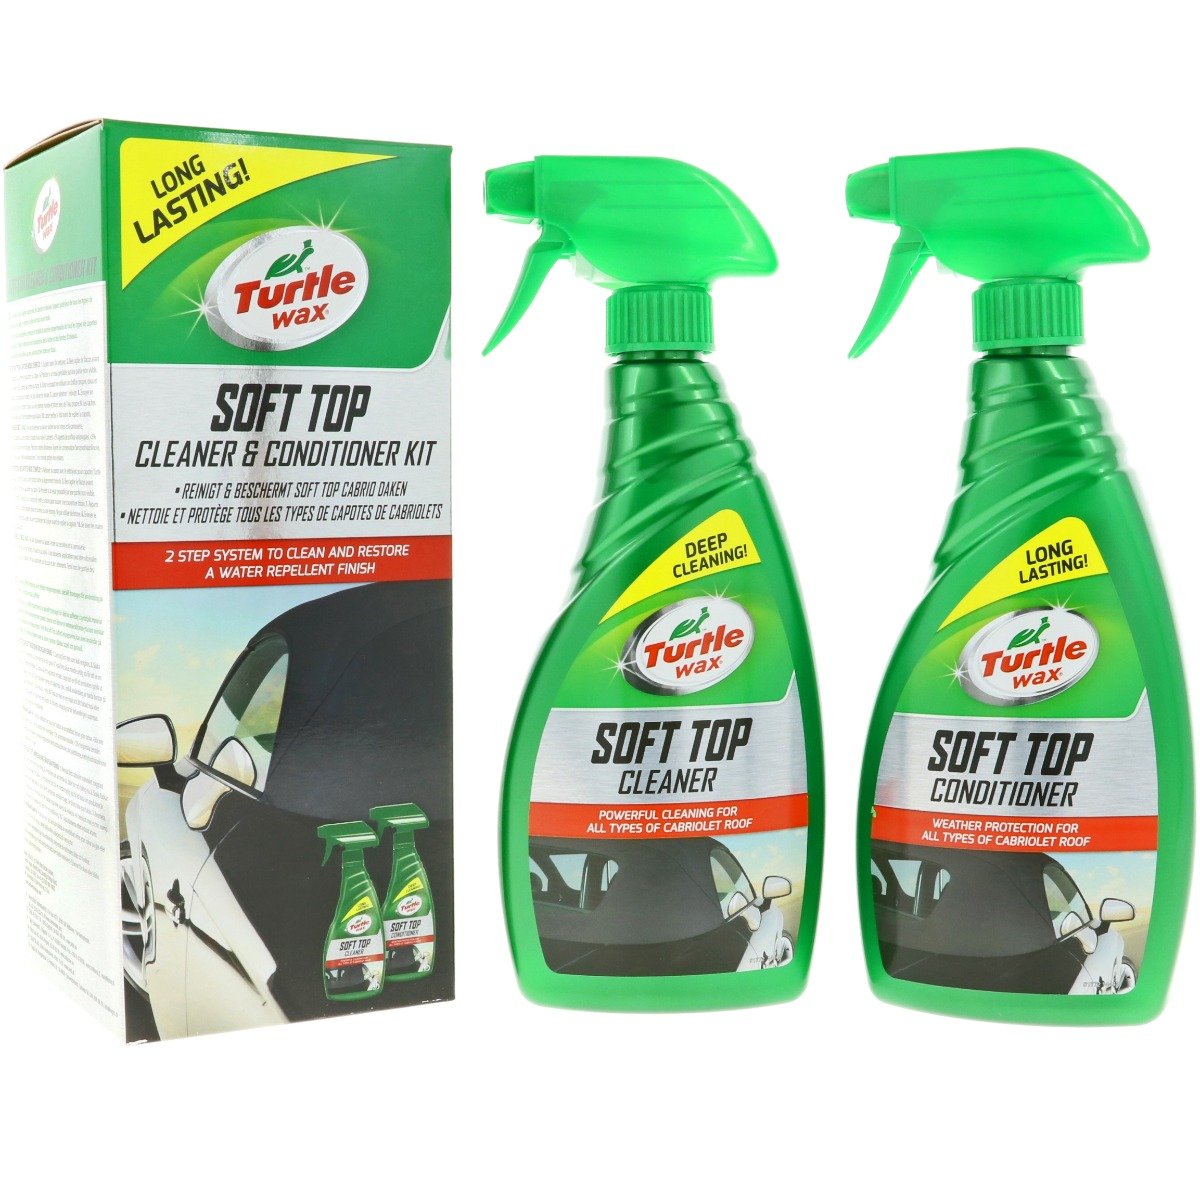 Soft Top Cleaner & Conditioner Kit